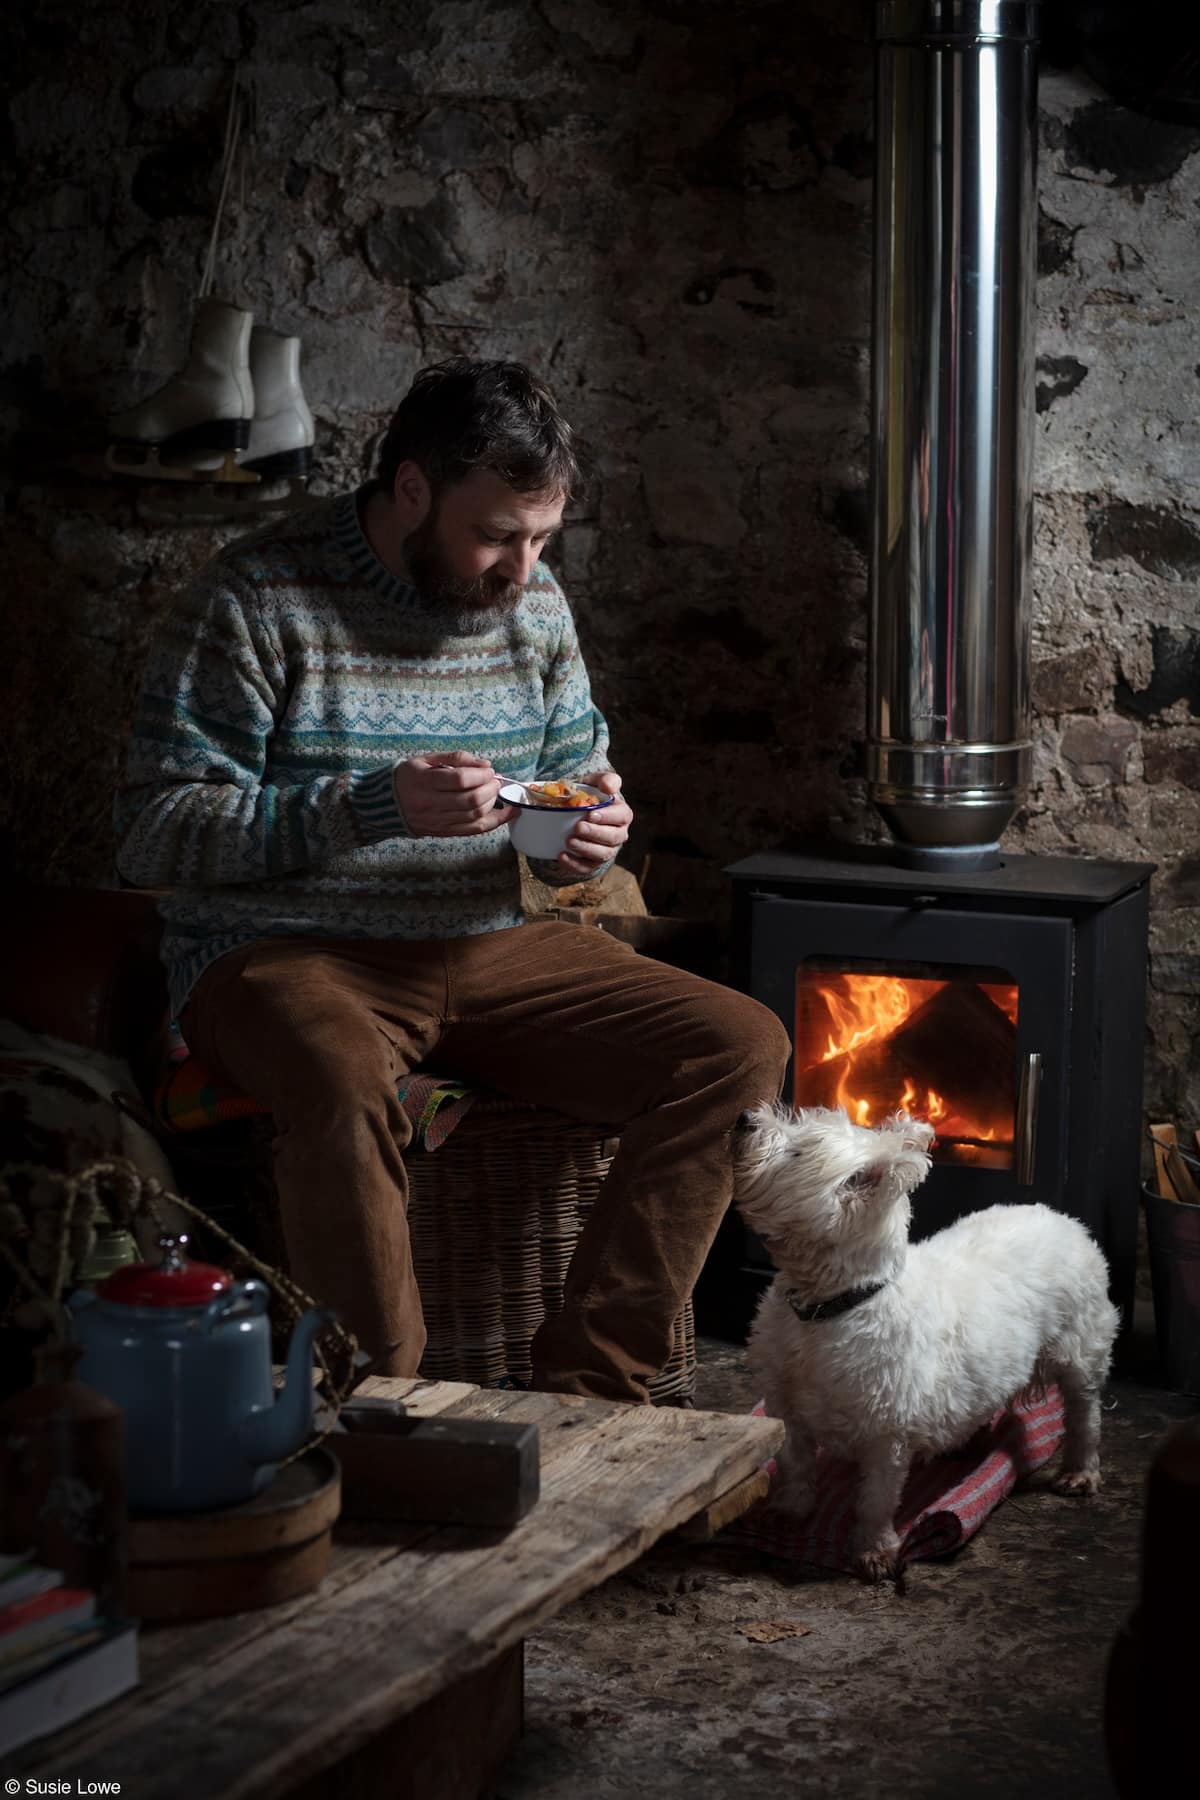 Peter enjoying his Scotch Broth by the fire with his dog, Seoras by Susie Lowe